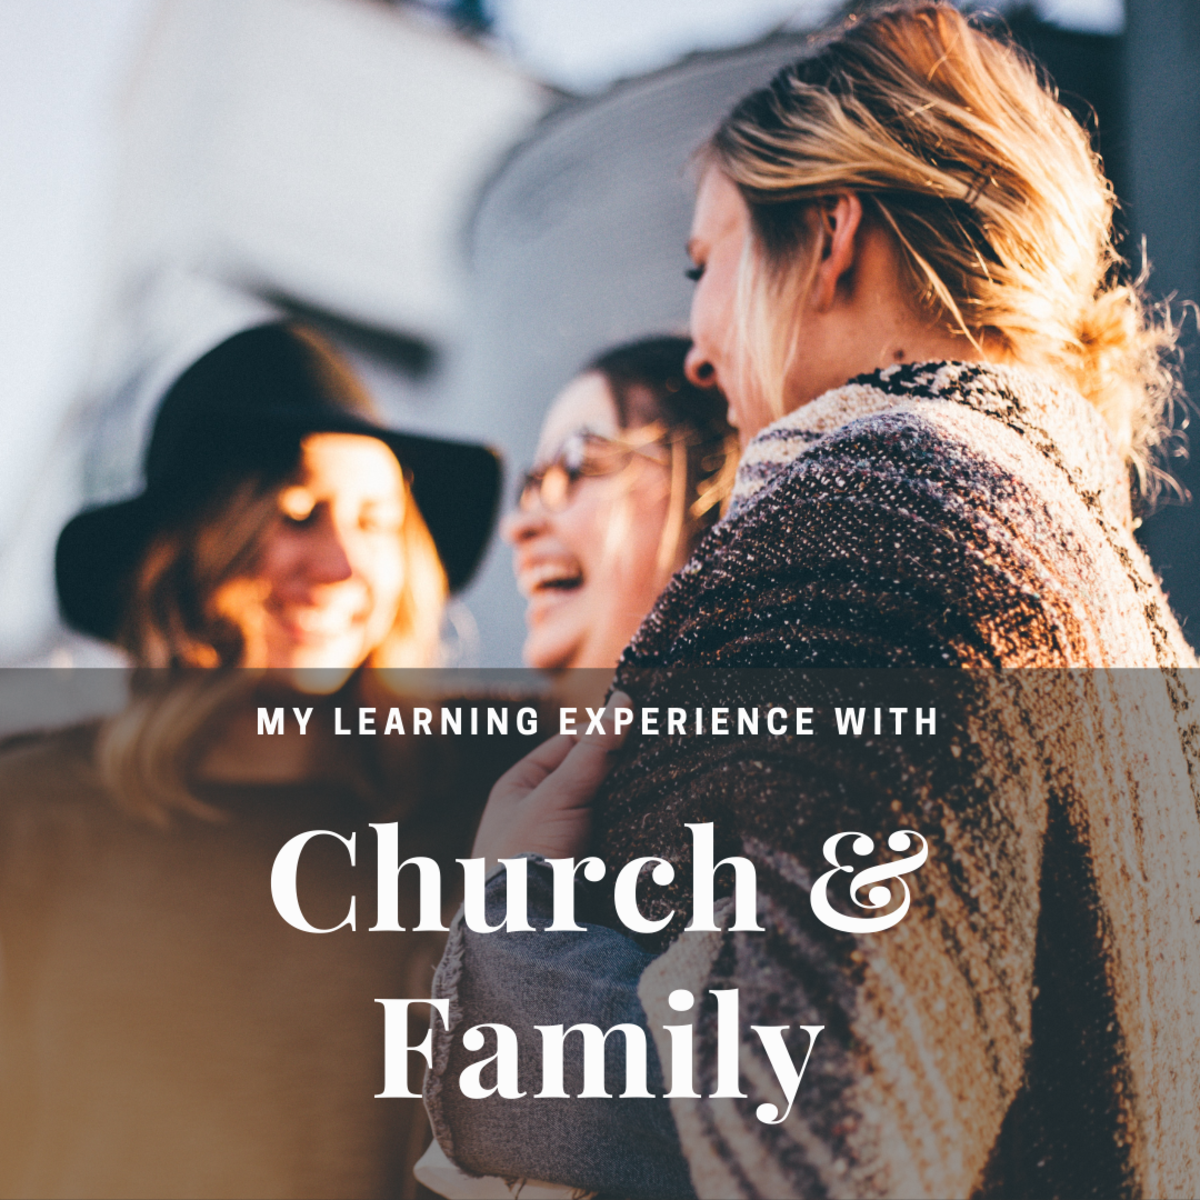 What can your church teach you about family?